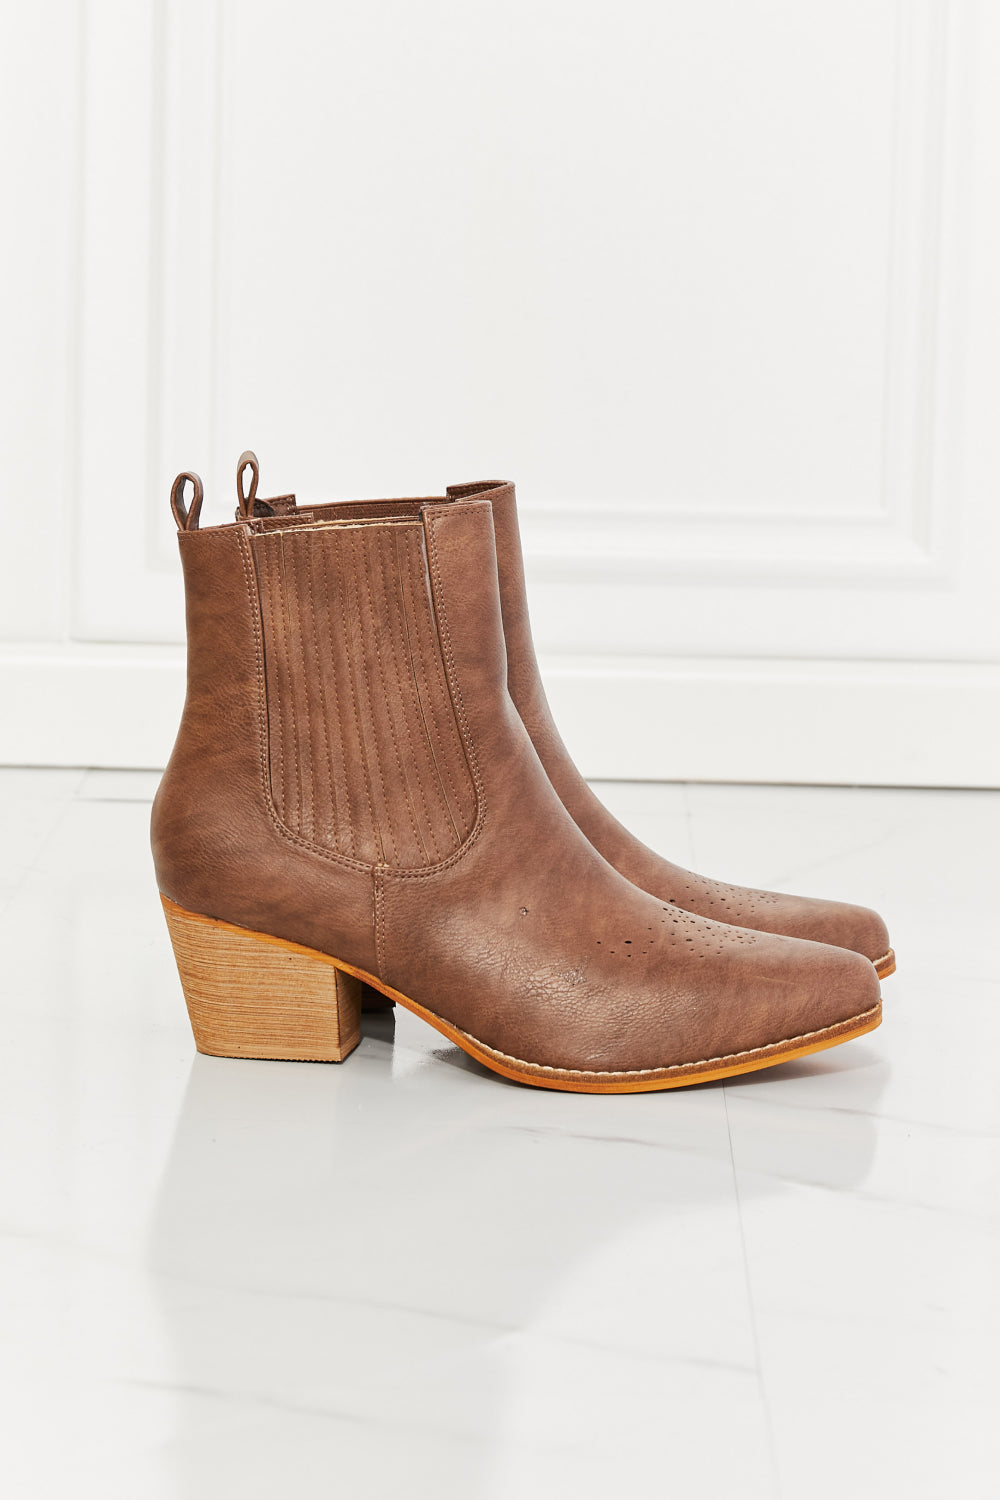 Beige MMShoes Love the Journey Stacked Heel Chelsea Boot in Chestnut Sentient Beauty Fashions shoes